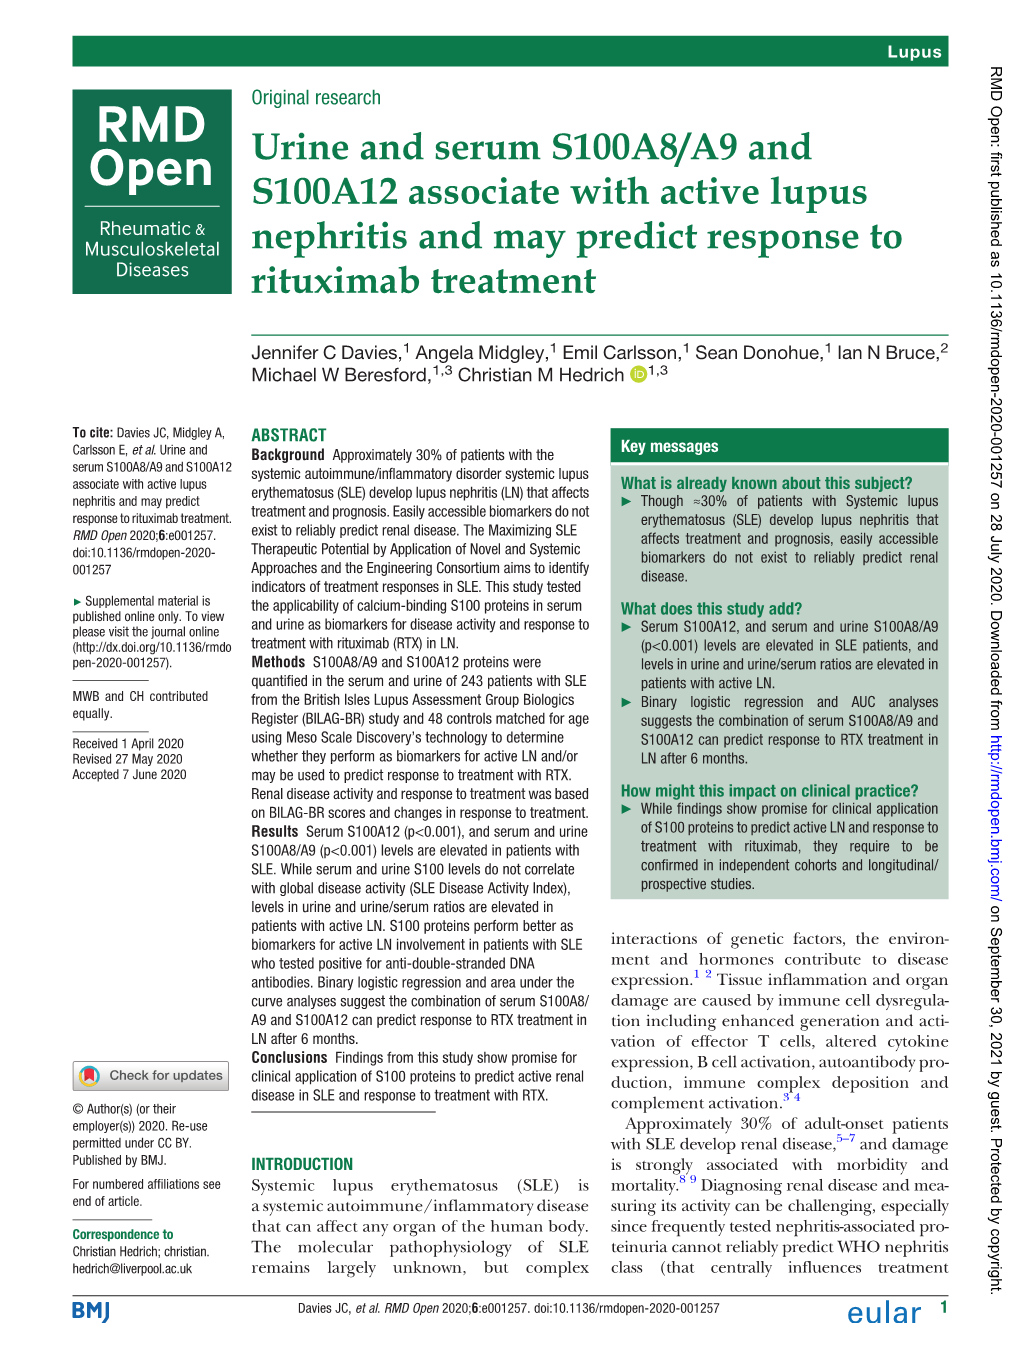 Urine and Serum S100A8/A9 and S100A12 Associate with Active Lupus Nephritis and May Predict Response to Rituximab Treatment